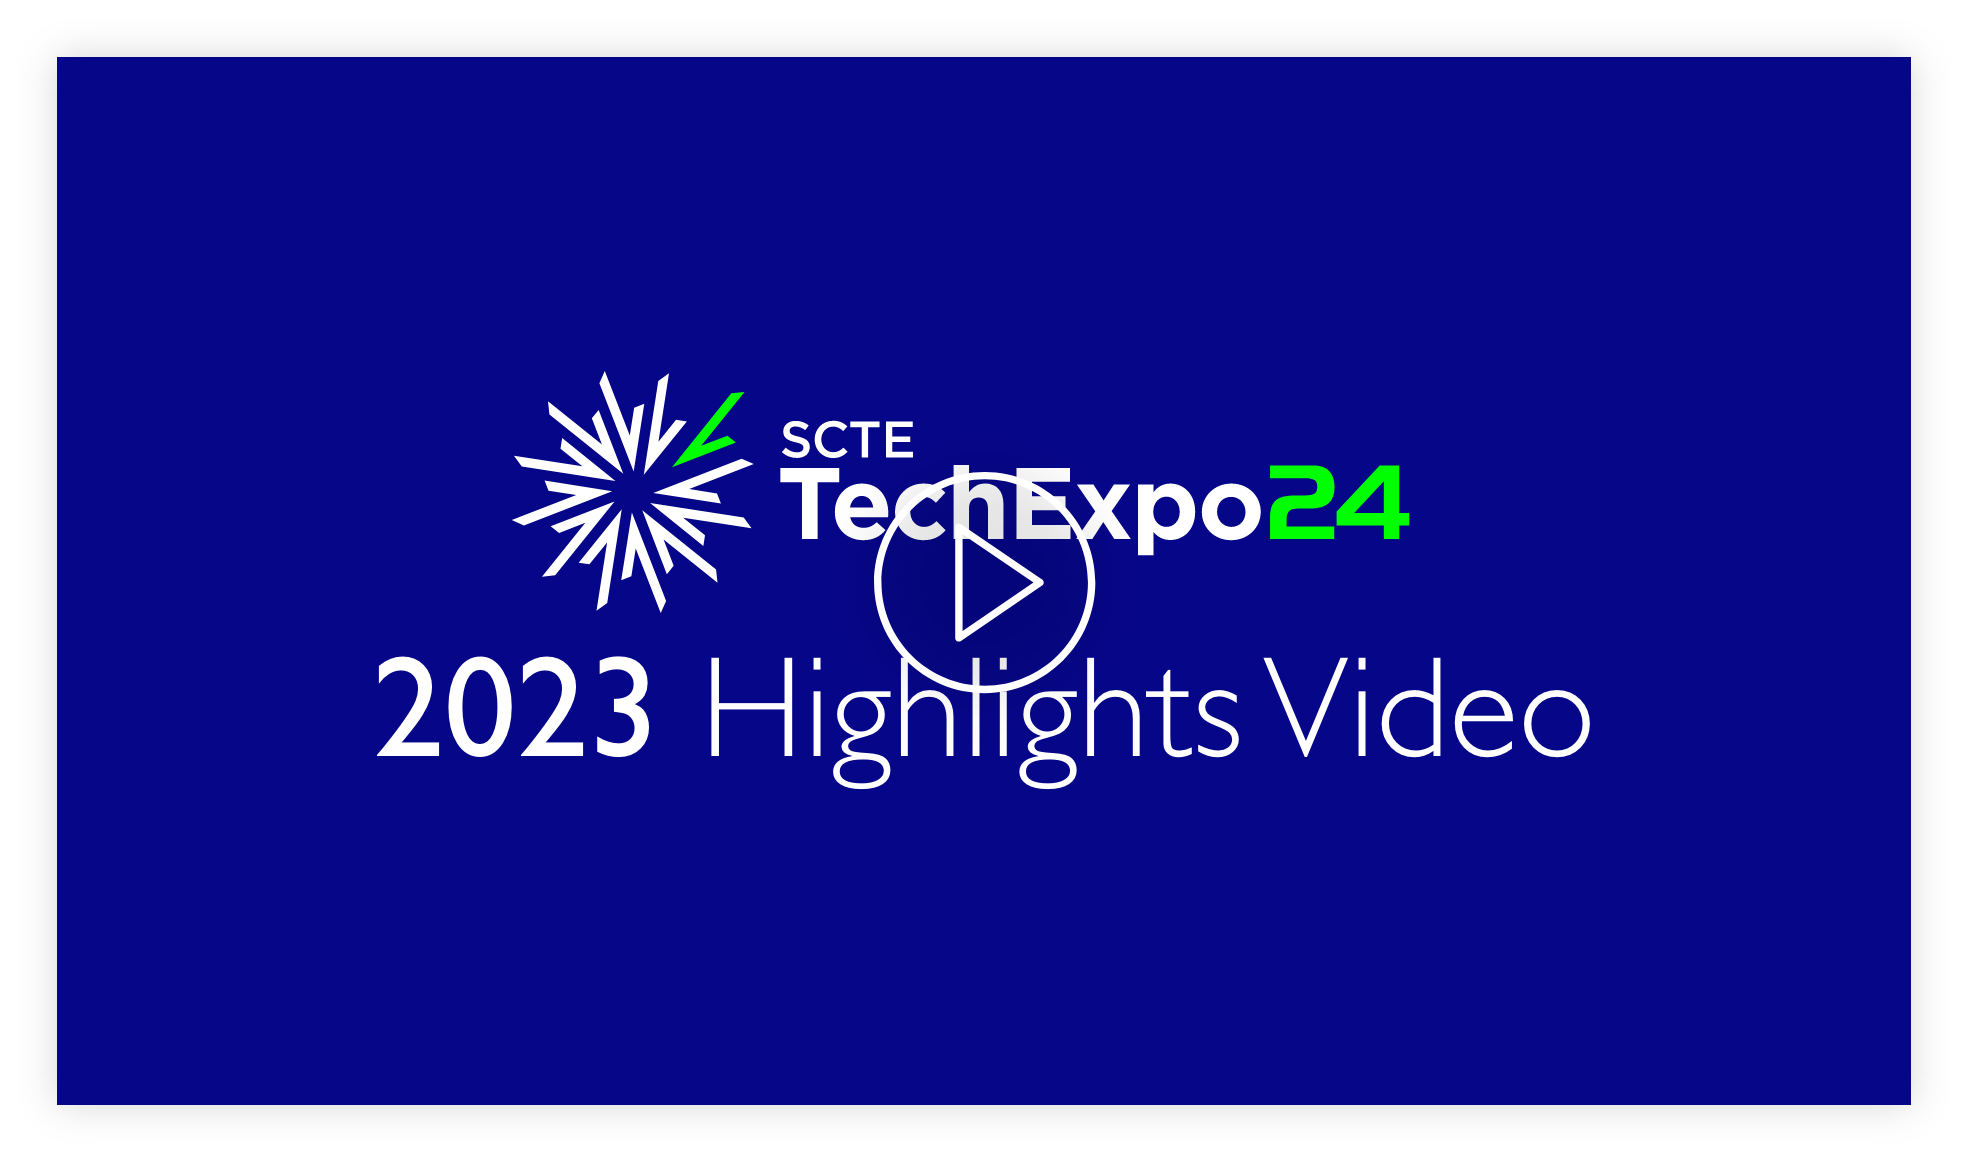 View highlights from SCTE TechExpo 2023, the largest broadband event in the Americas